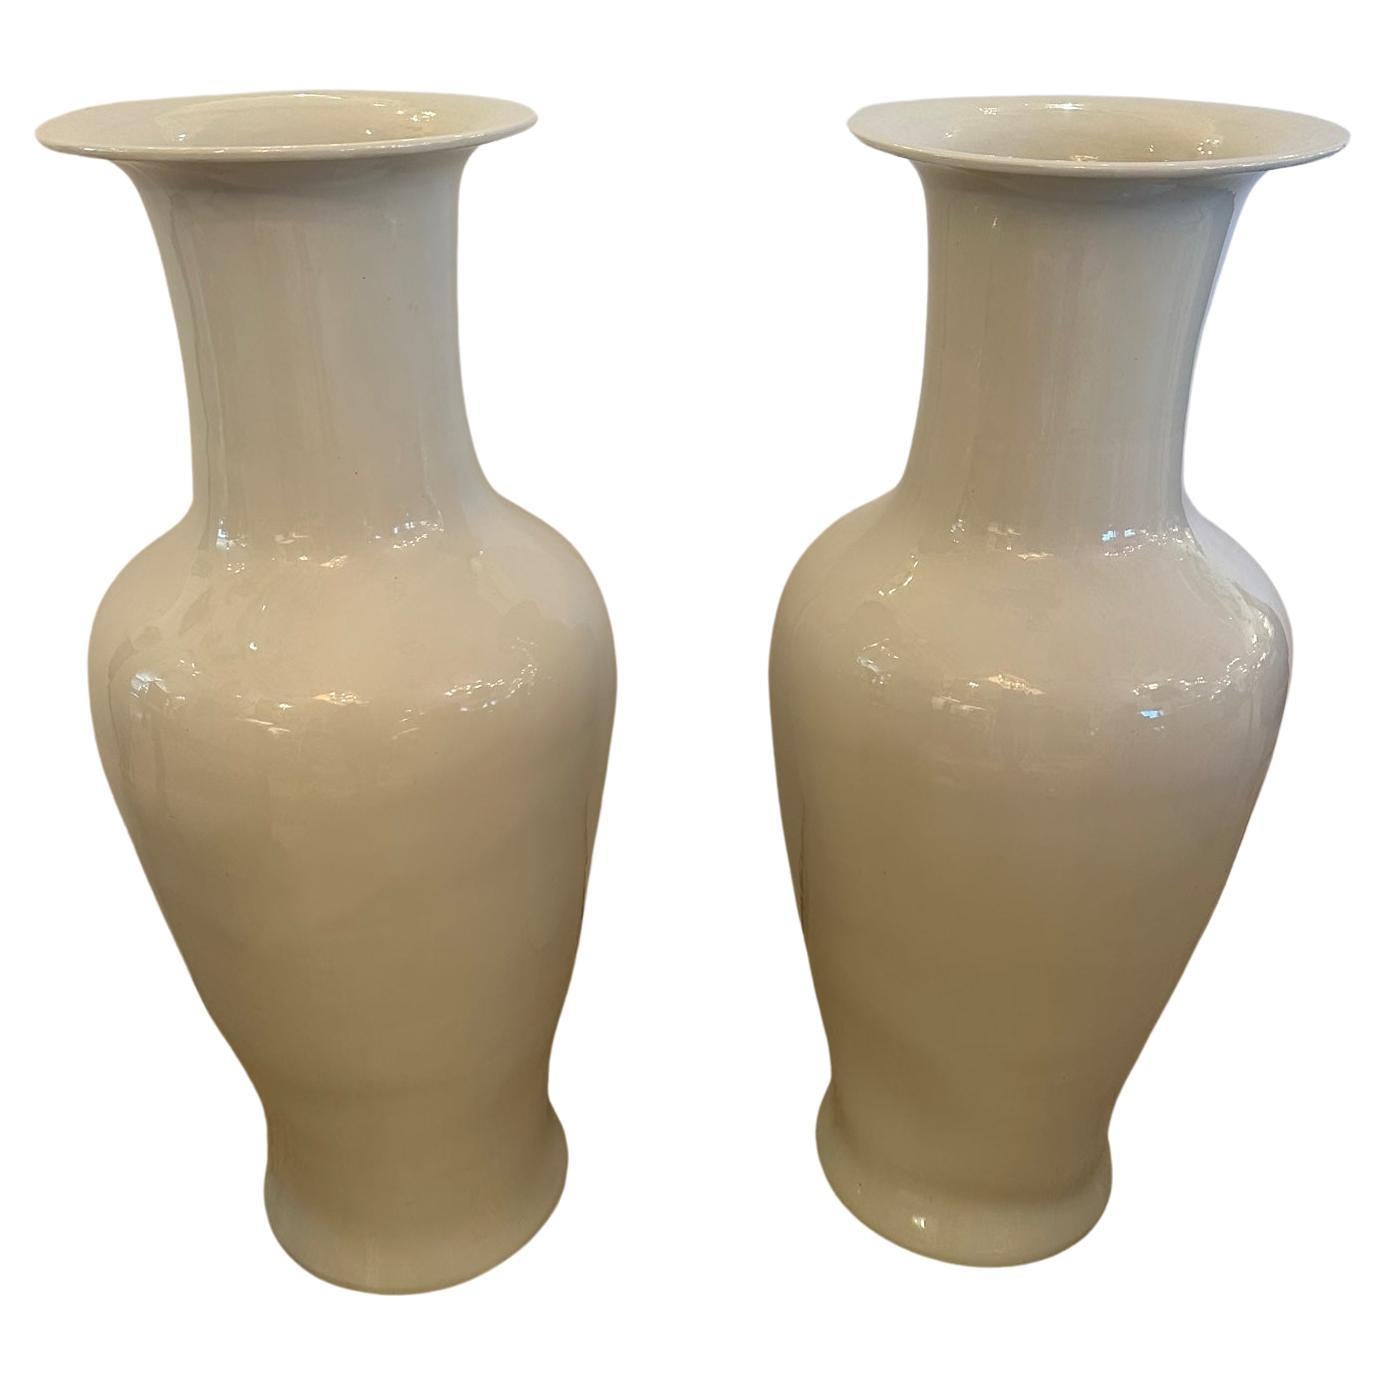 Enormous Pair of Blanc de Chine Asian Floor Vases with Striking Scale